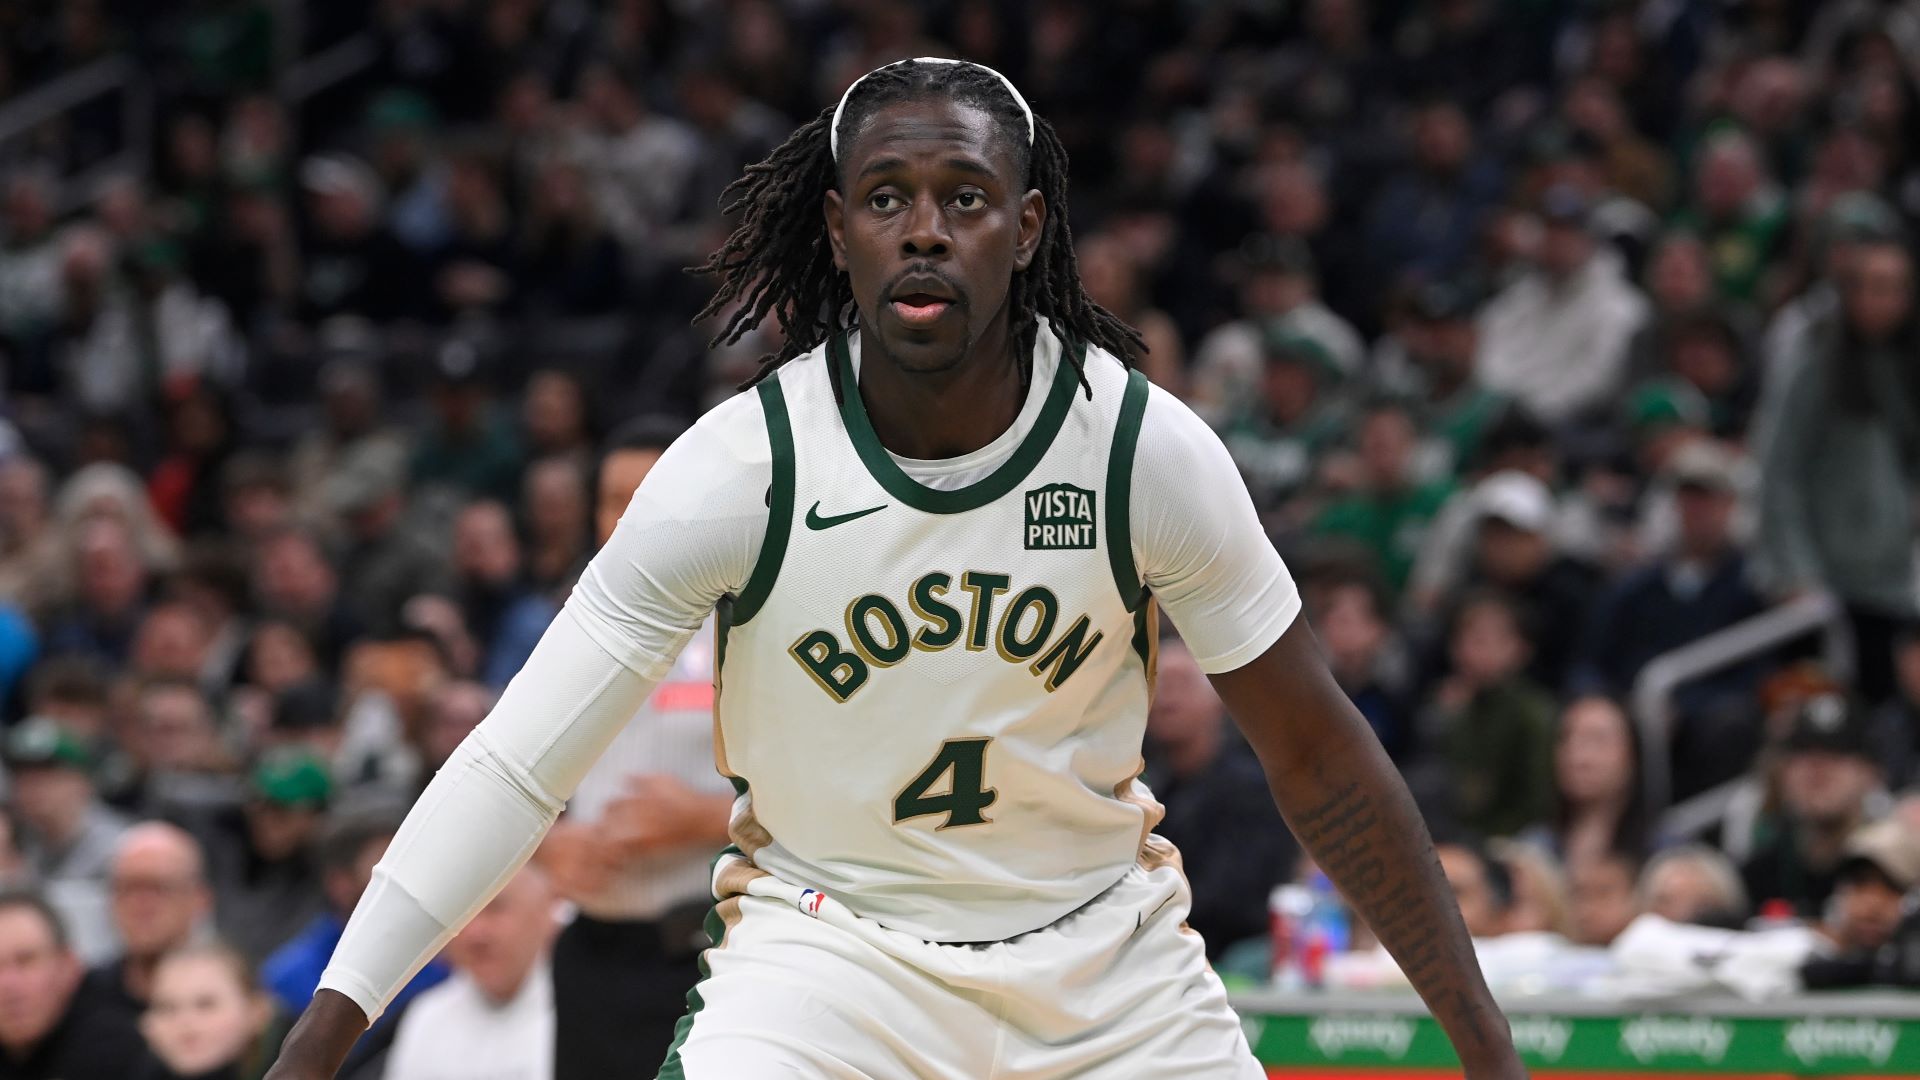 How Jrue Holiday’s Extension Has Huge Benefit On Celtics Cap
Situation